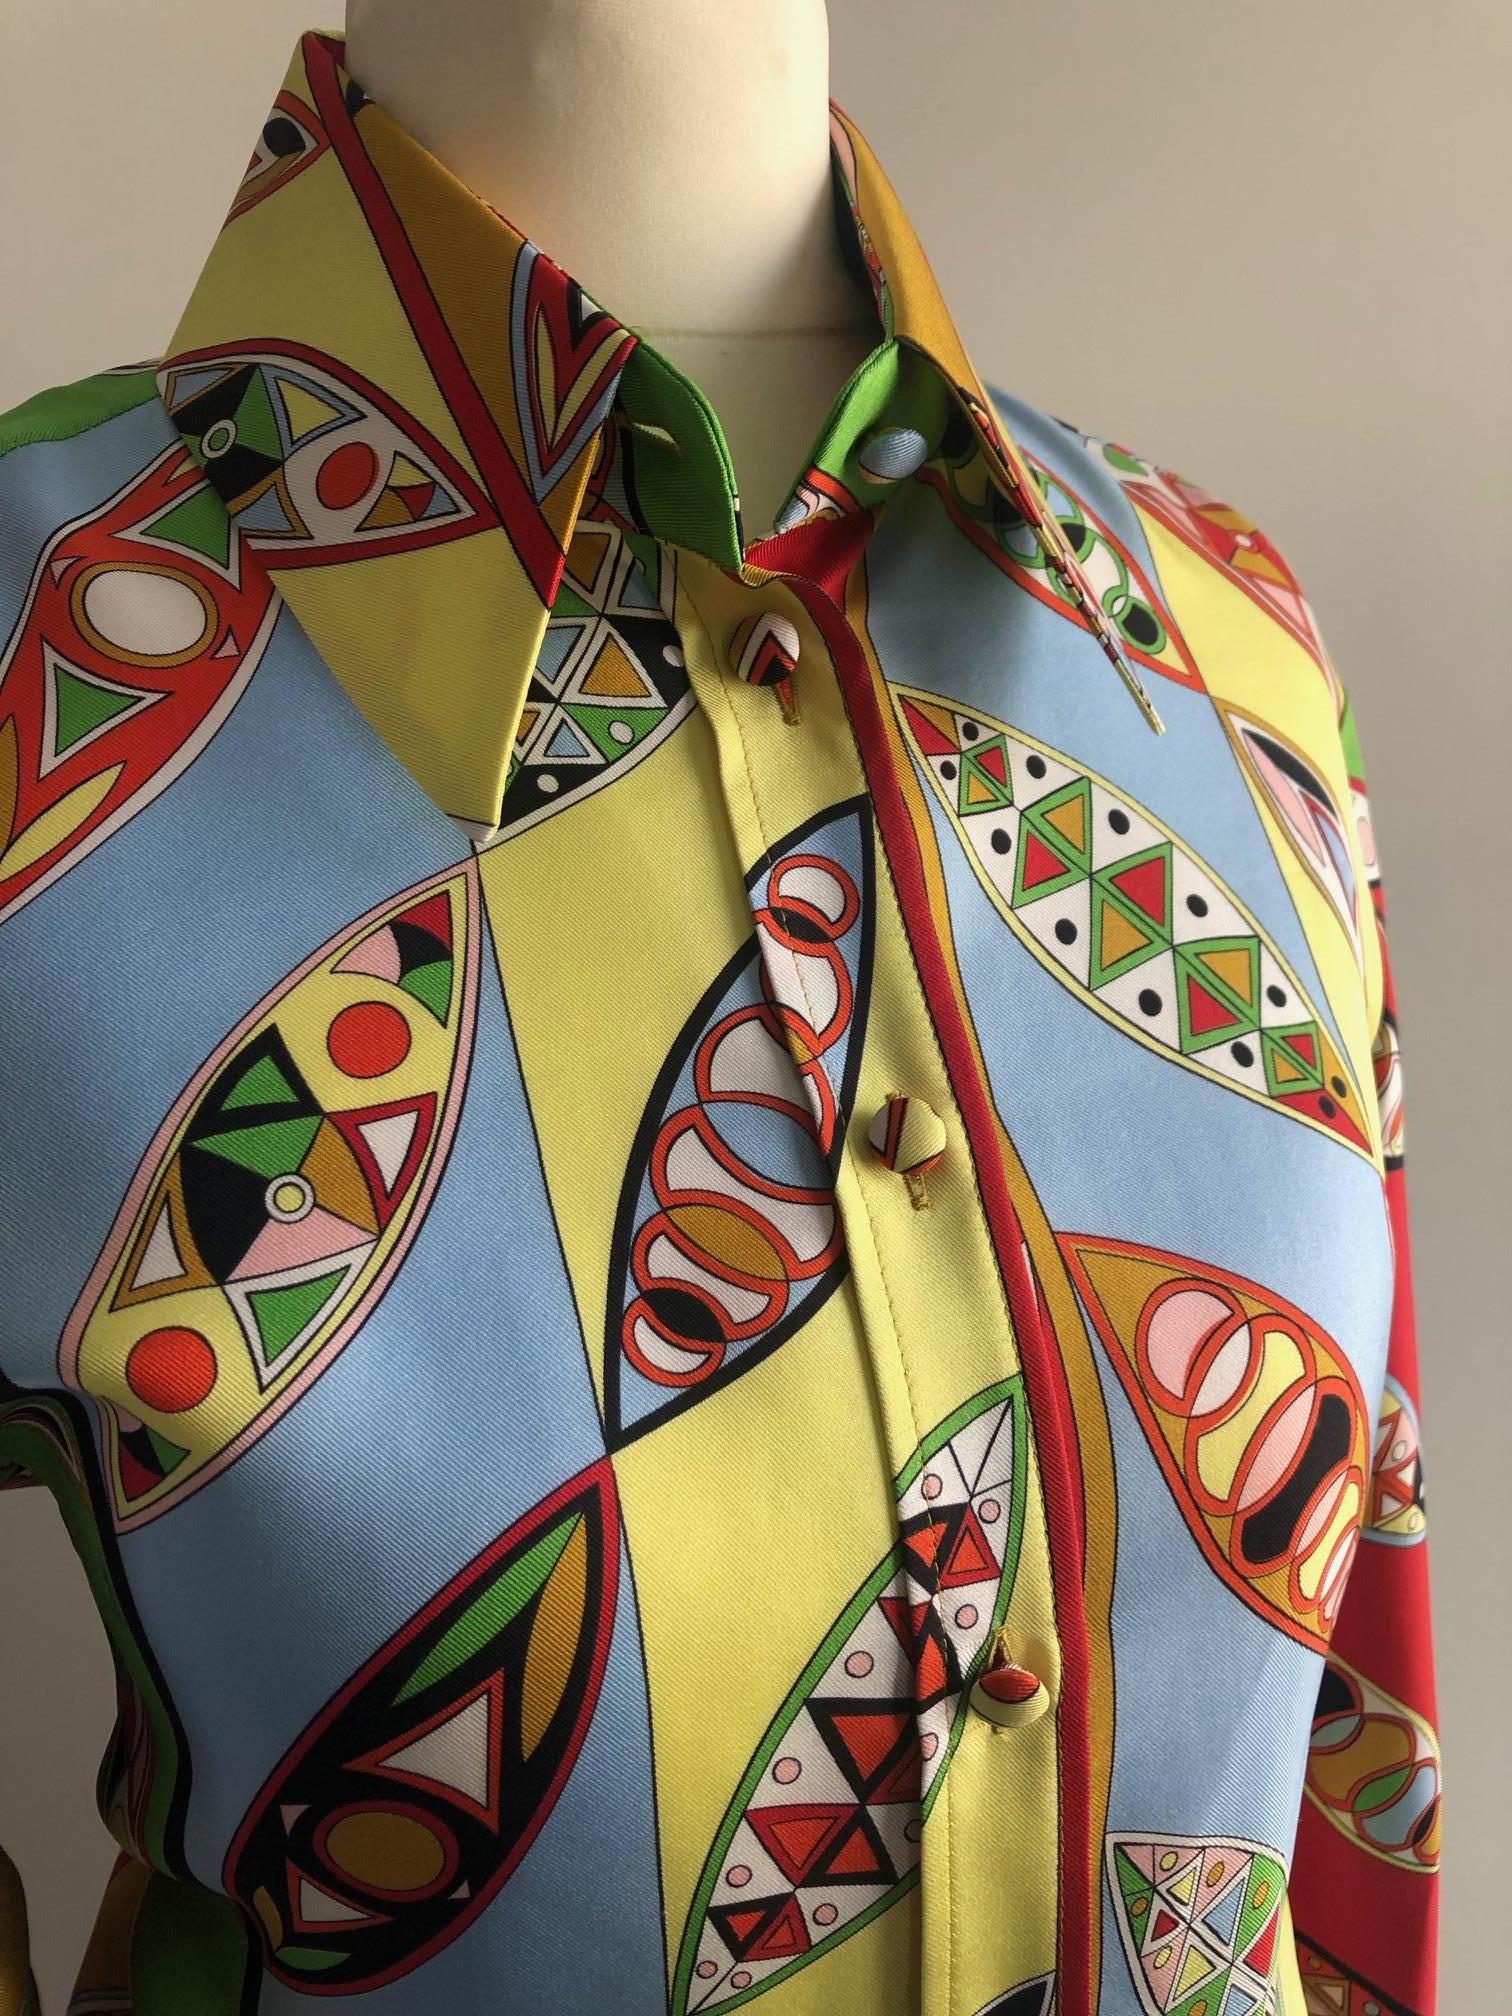 EMILIO PUCCI Iconic Printed Fitted silk-twill Pucci shirt

Iconic vibrant Emilio Pucci fitted shirt. Handcrafted from silk-twill, geometric motifs patterned from Emilio Pucci 1966 archives. In To wear every day with skirt, trousers...The YSL vintage